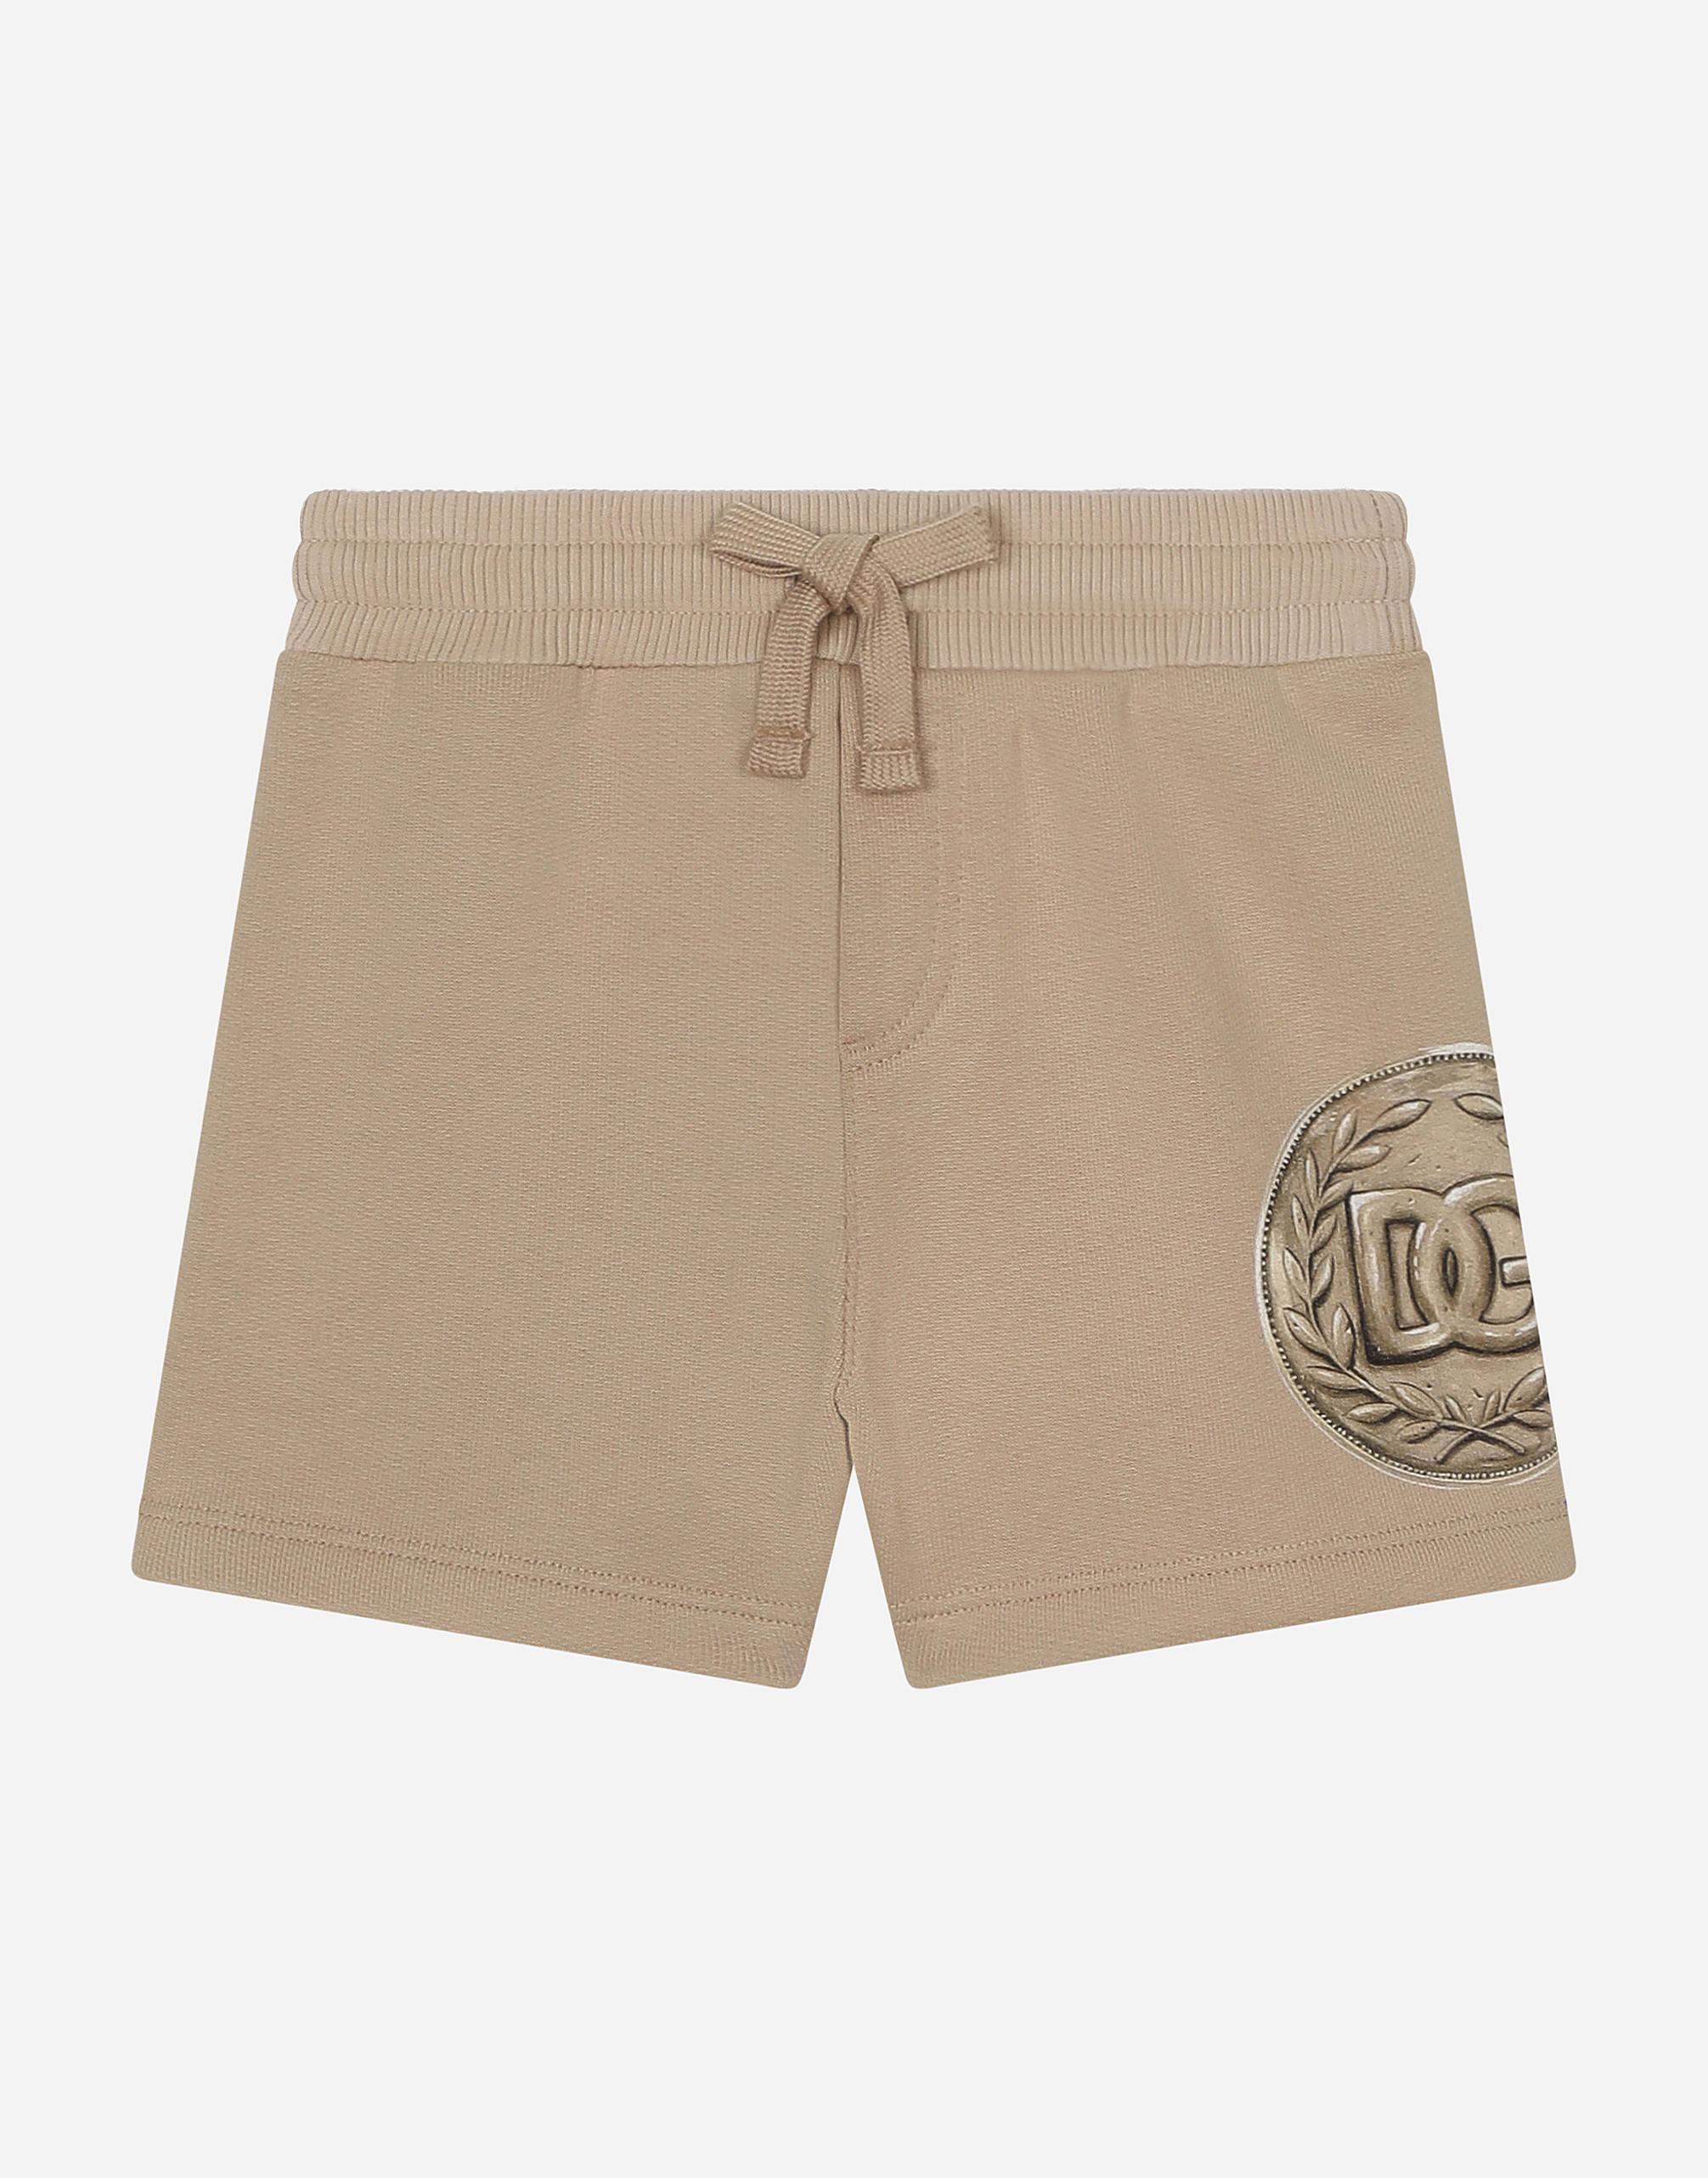 DOLCE & GABBANA JERSEY JOGGING SHORTS WITH COIN PRINT